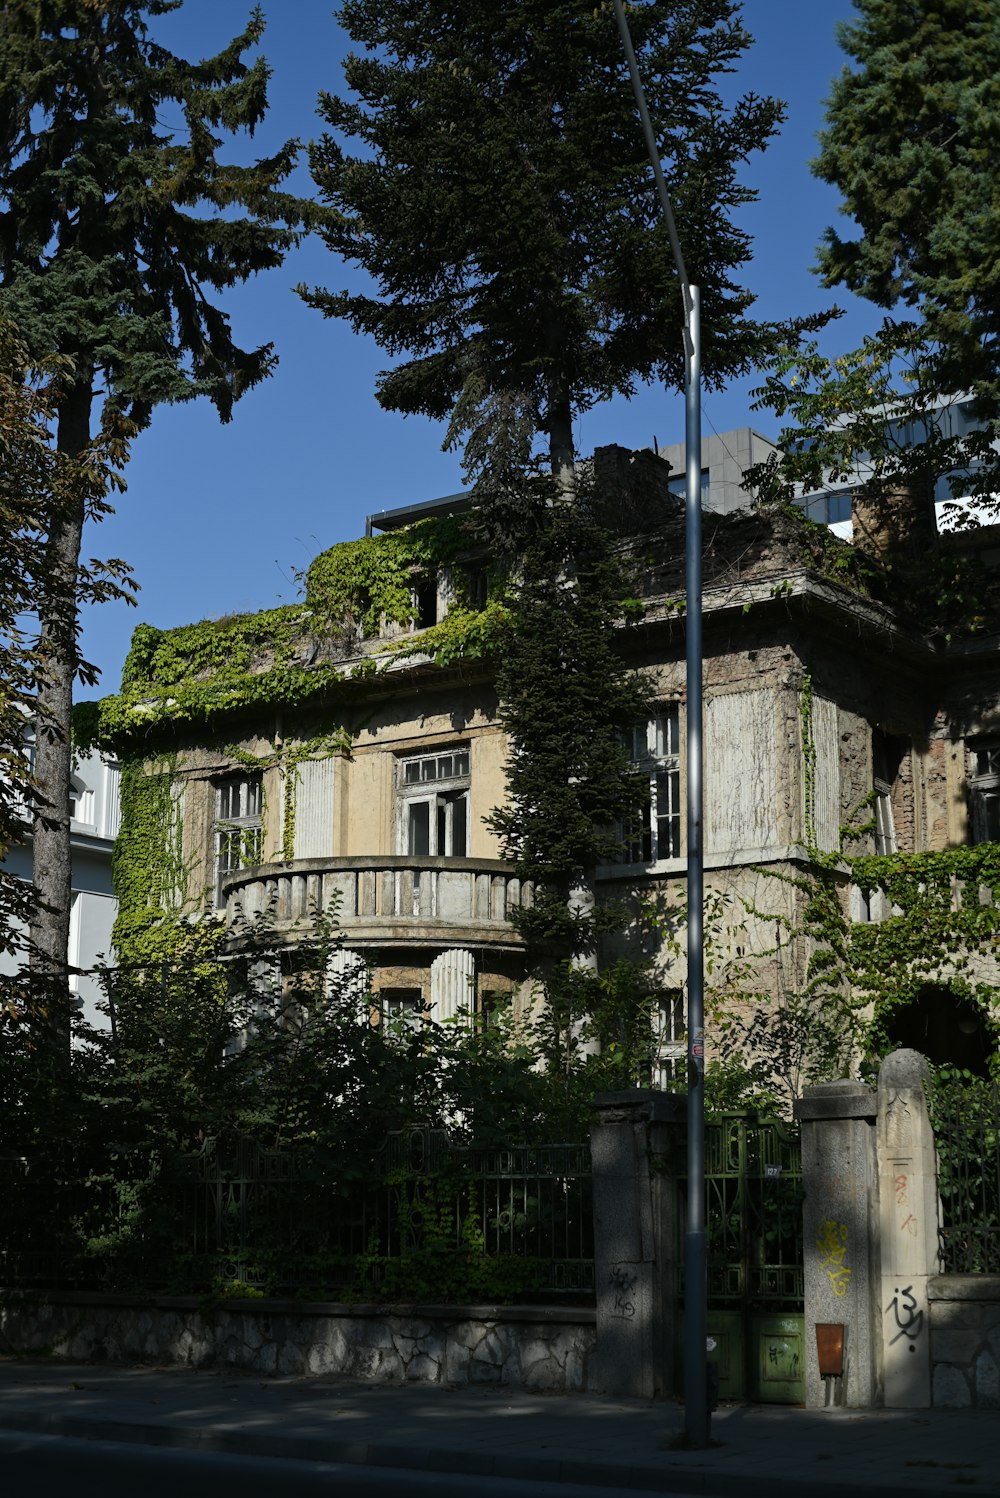 an old building with a green roof surrounded by trees